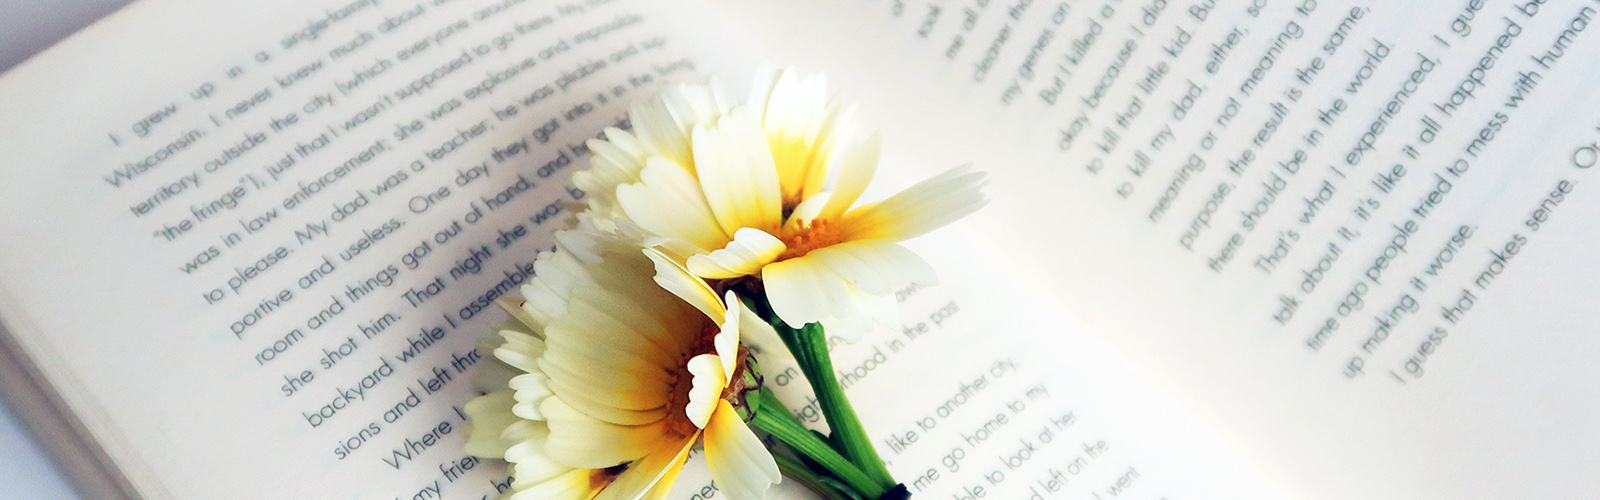 flowers laid on top of an open book